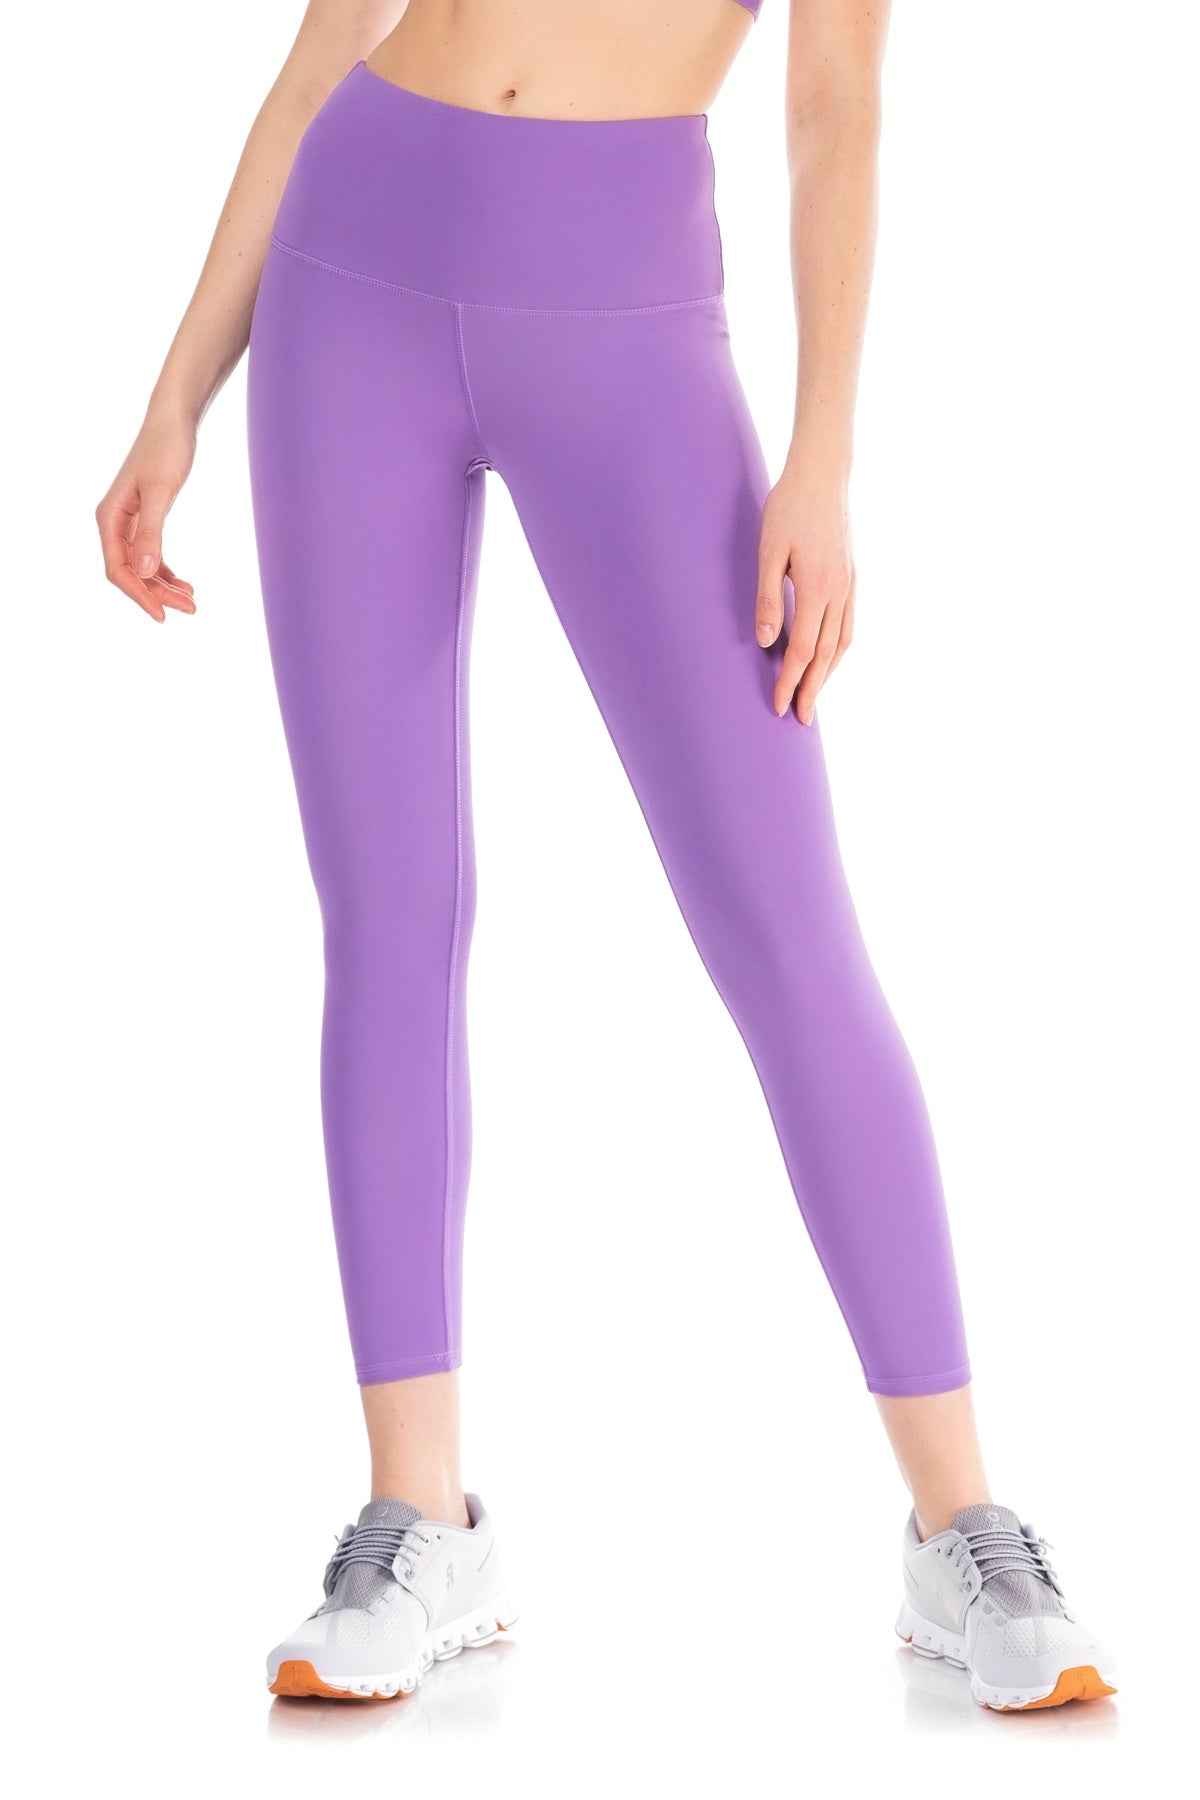 Yoga Outfit Higher Waisted Women Pants 25 Inch Inseam Leggings Sport  Fitness Buttery Soft Gym Exercise For